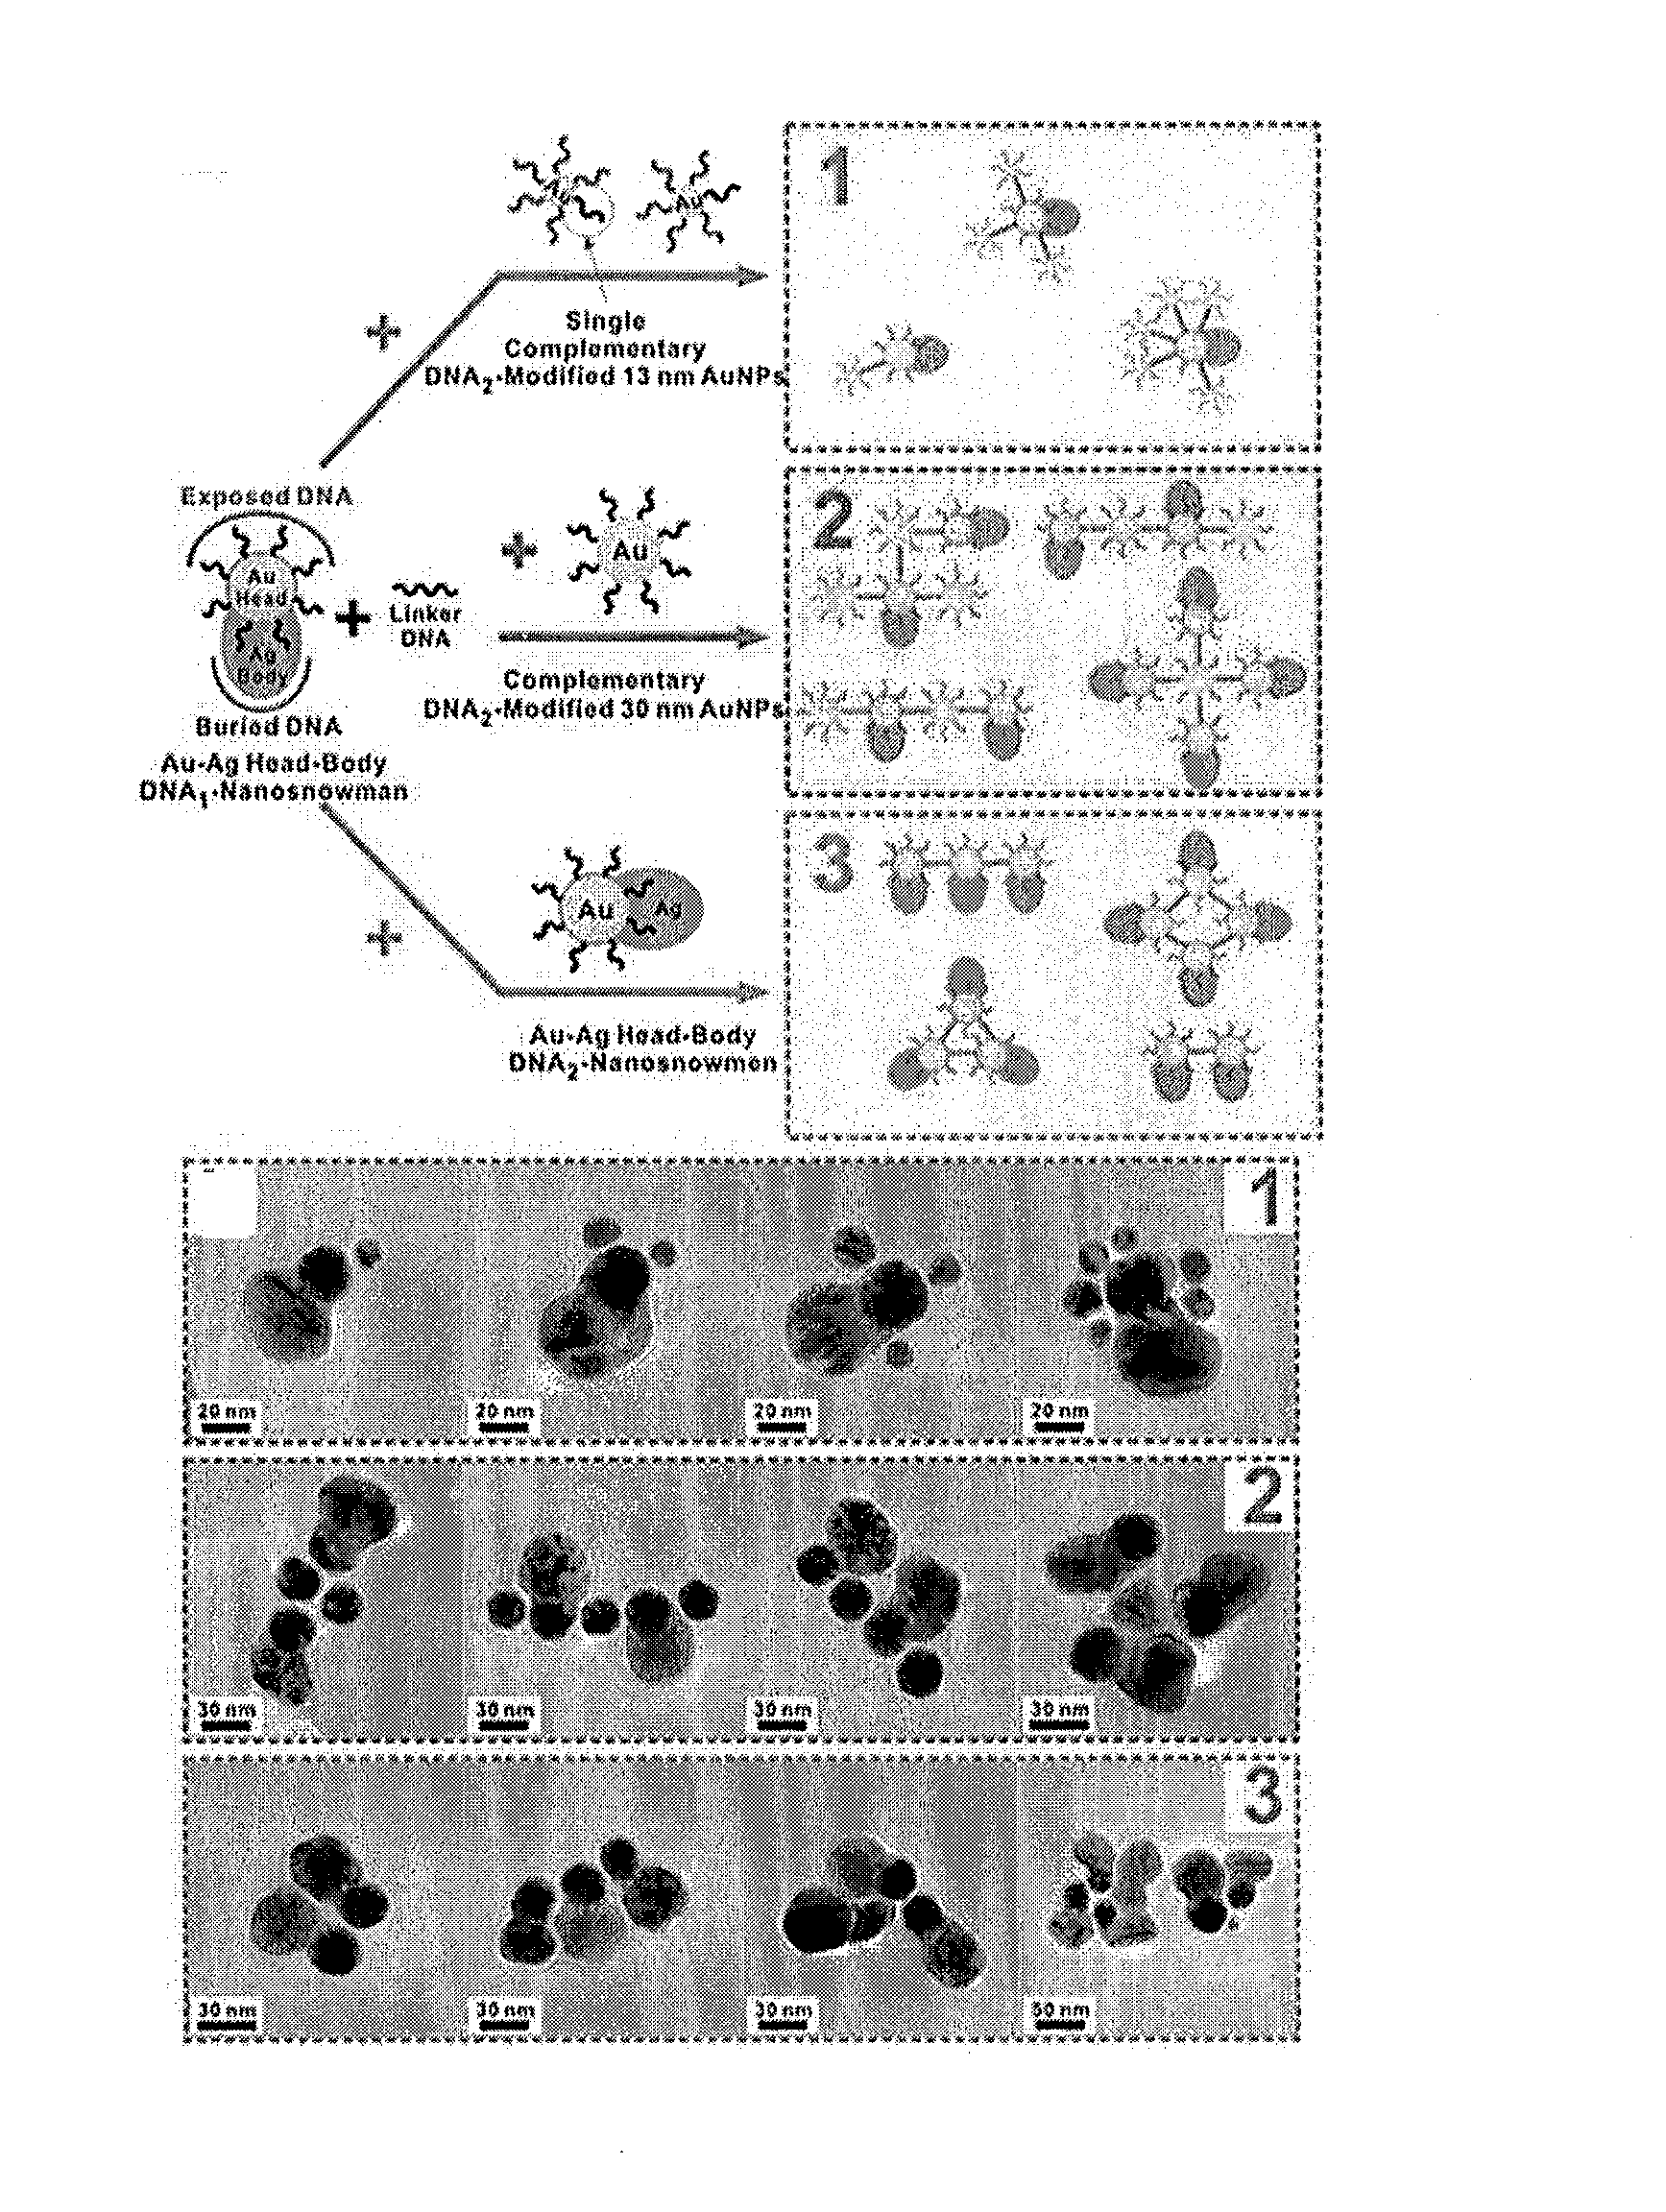 Nanoparticles in the shape of nanosnowman with a head part and a body part, a preparation method thereof and a detection method using the same